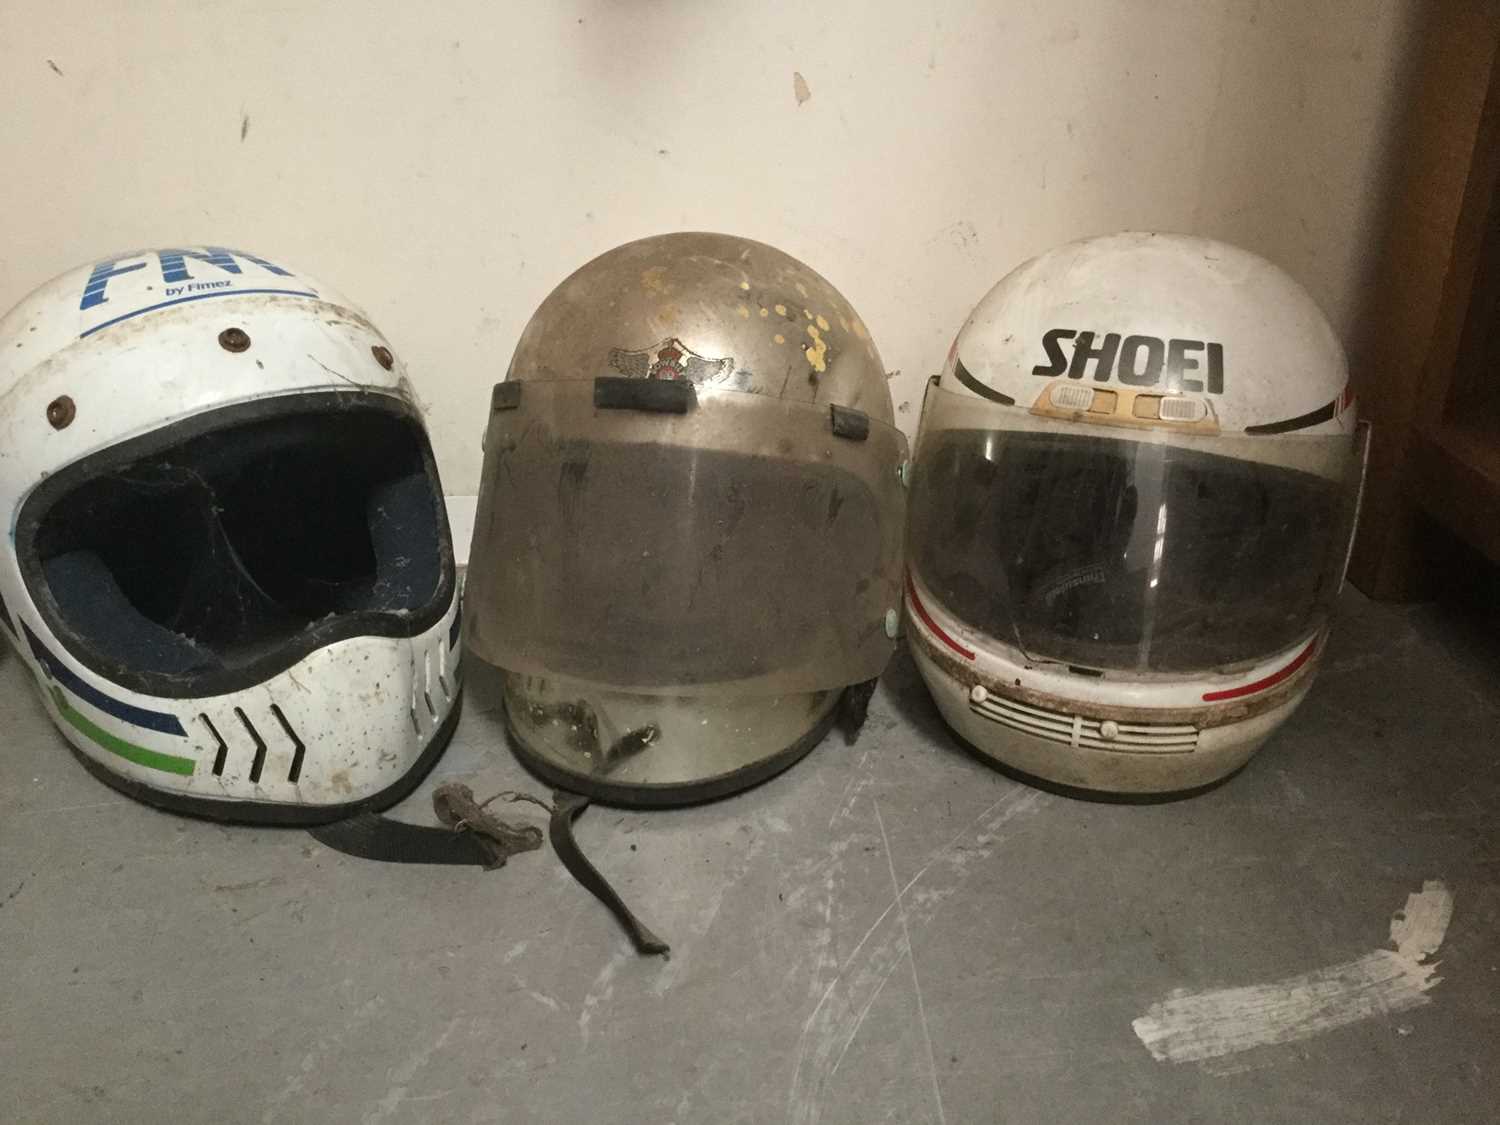 Three vintage motorcycle leathers together with a selection of motorcycle helmets - Image 3 of 4